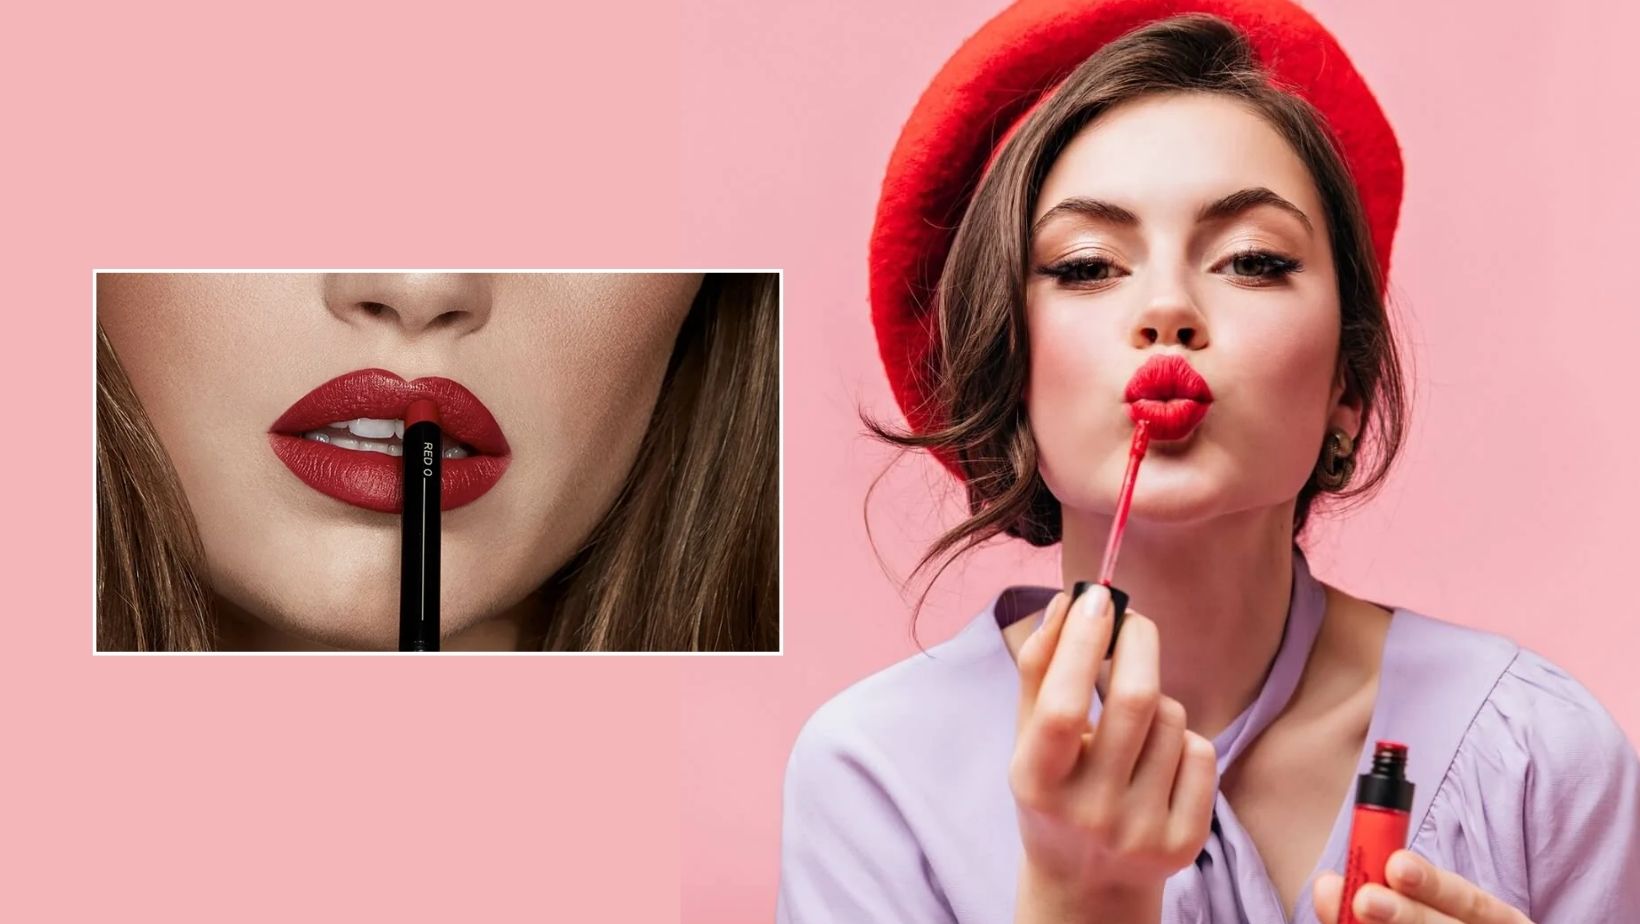 Fall Deep in Love with the Best Dark Lipstick Shades